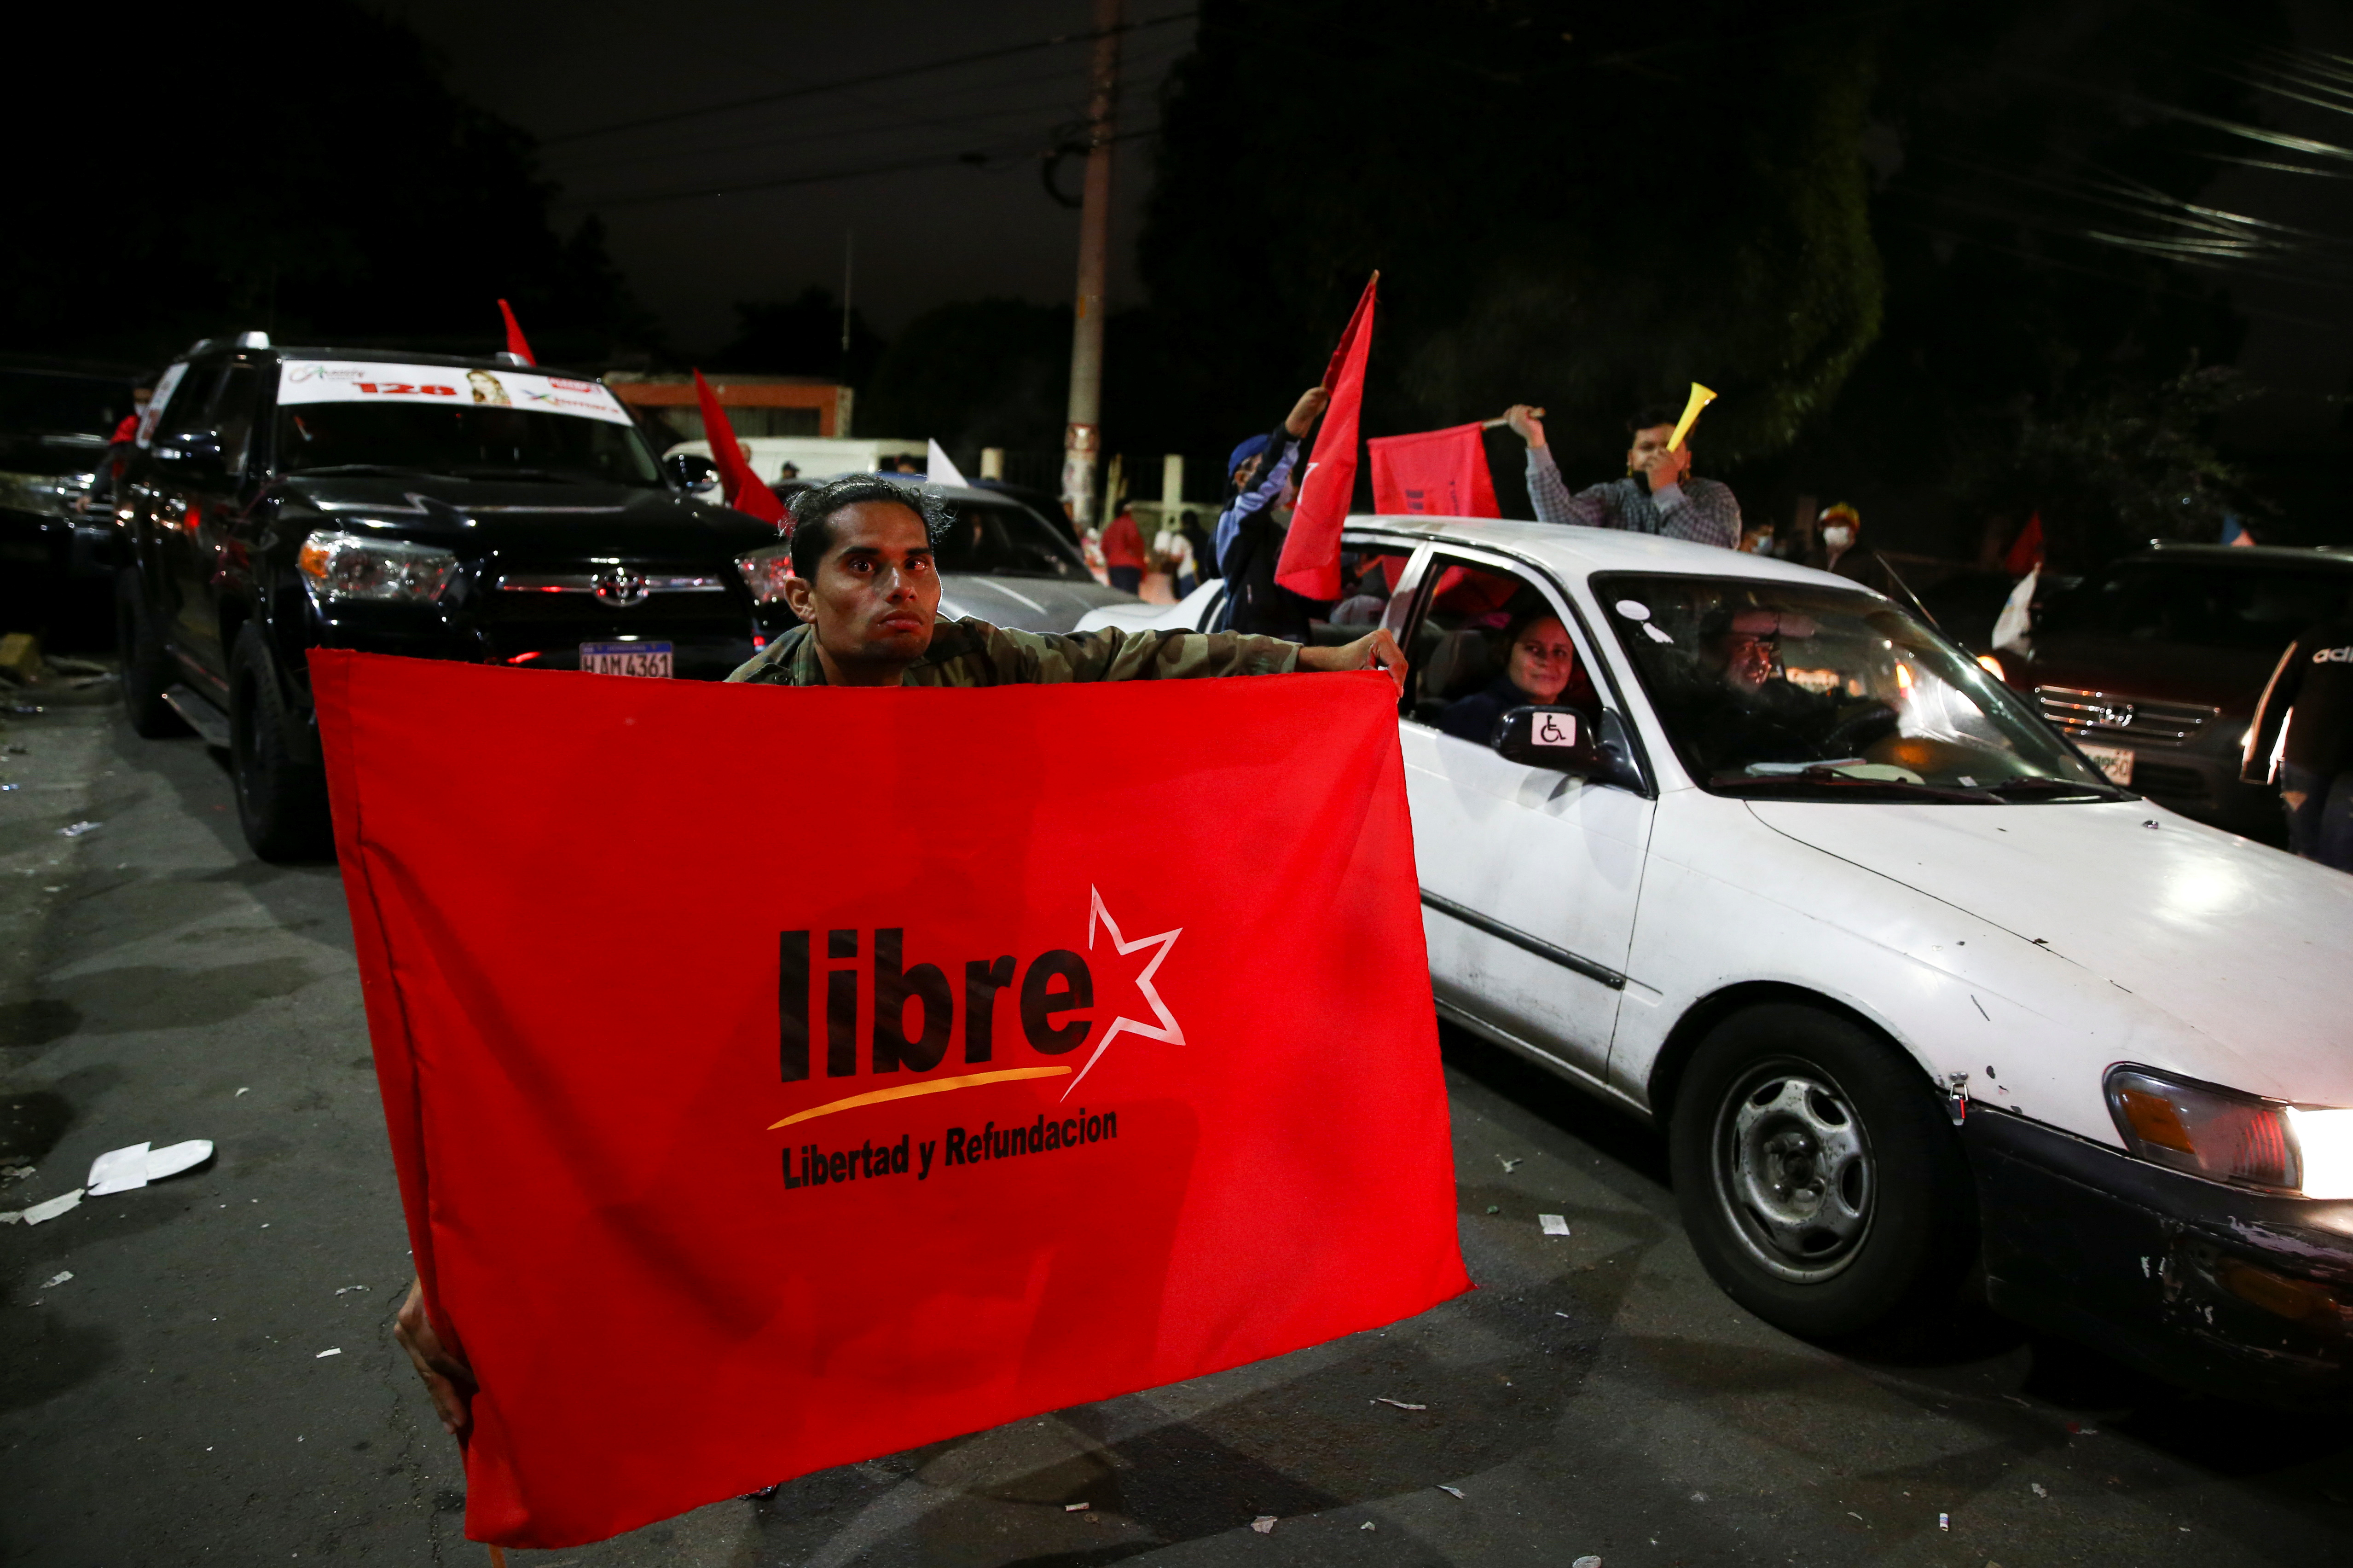 Supporters of Xiomara Castro, presidential candidate of the Liberty and Refoundation Party (LIBRE), celebrate at their headquarters in Tegucigalpa, Honduras, November 29, 2021. REUTERS/Jose Cabezas